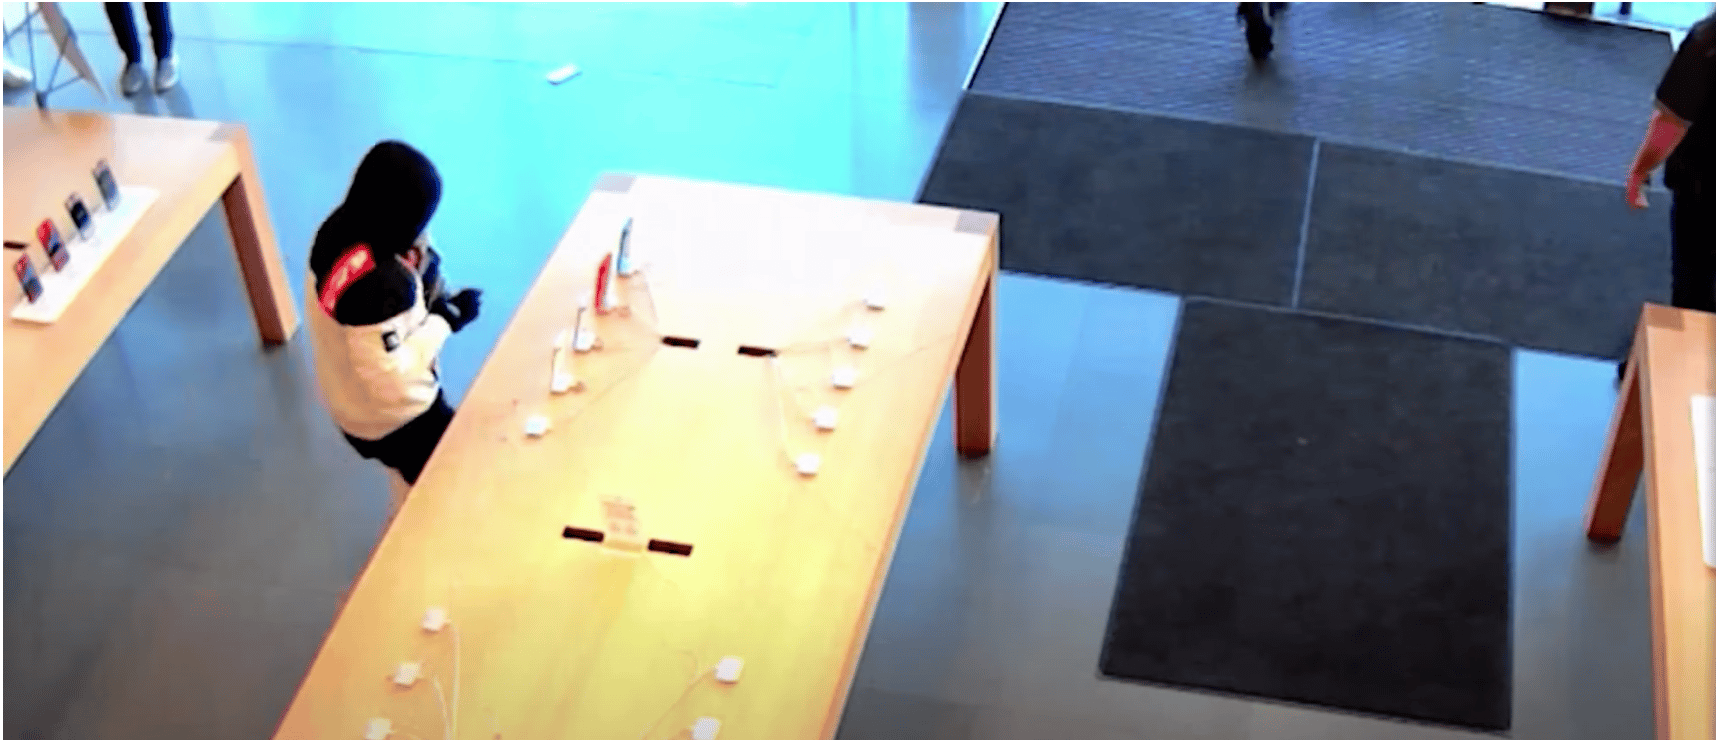 (WATCH) California Apple store ransacked by thieves as staff warn customers not to stop them